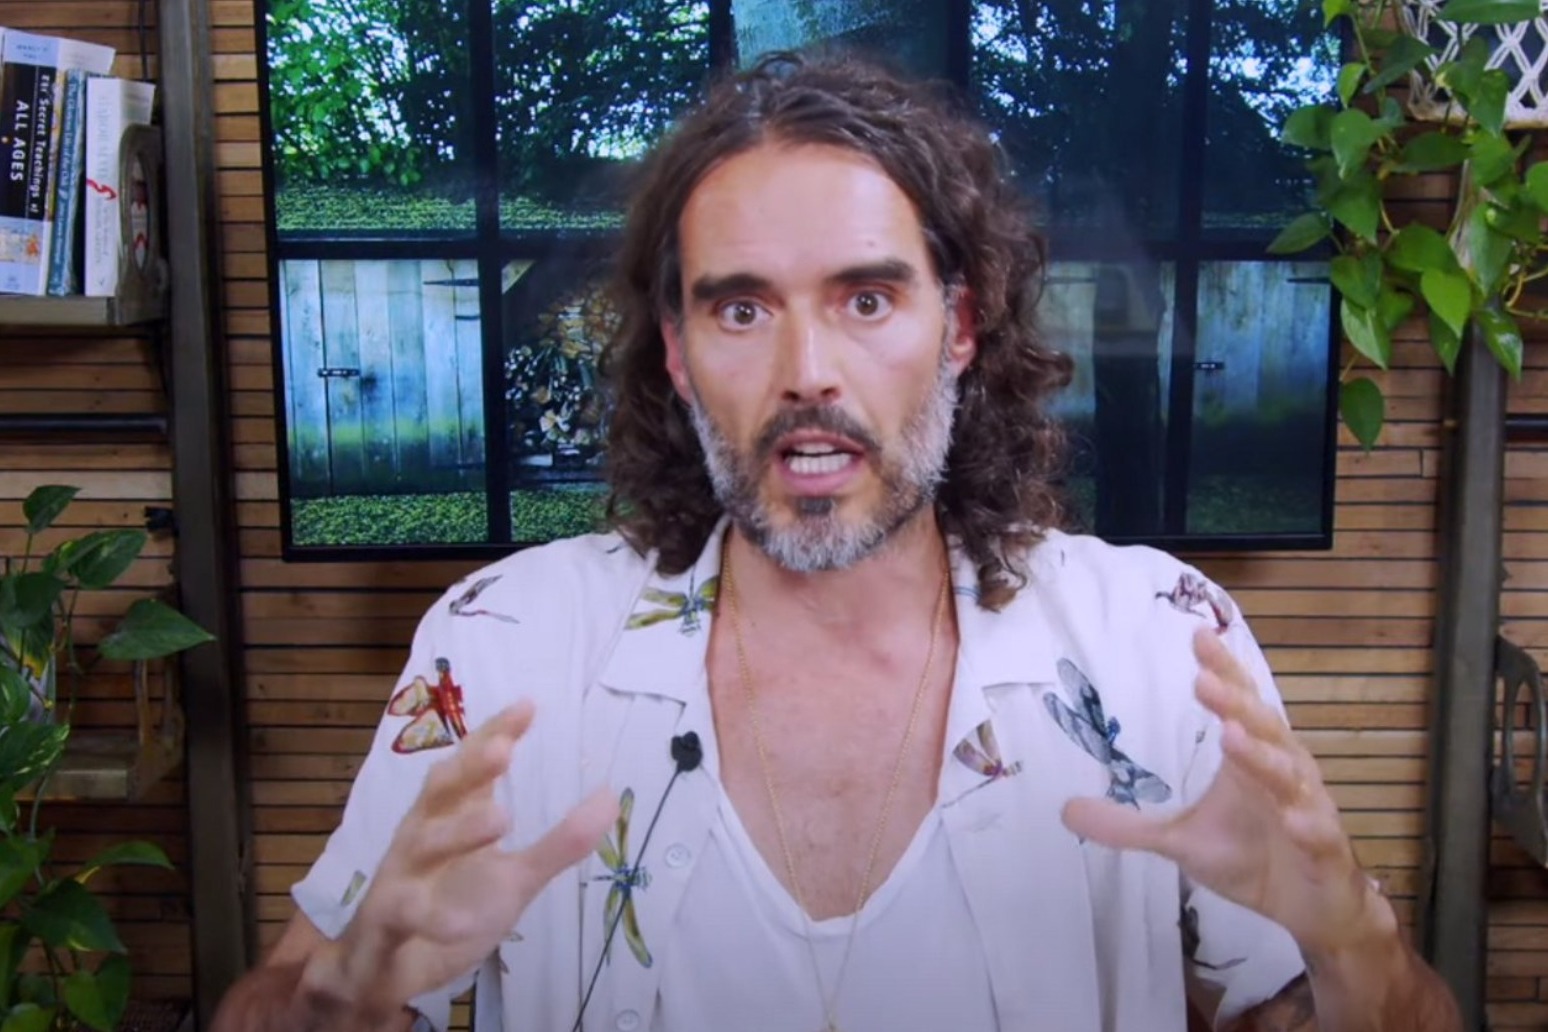 Investigation launched after claims of misconduct by Russell Brand on TV shows 